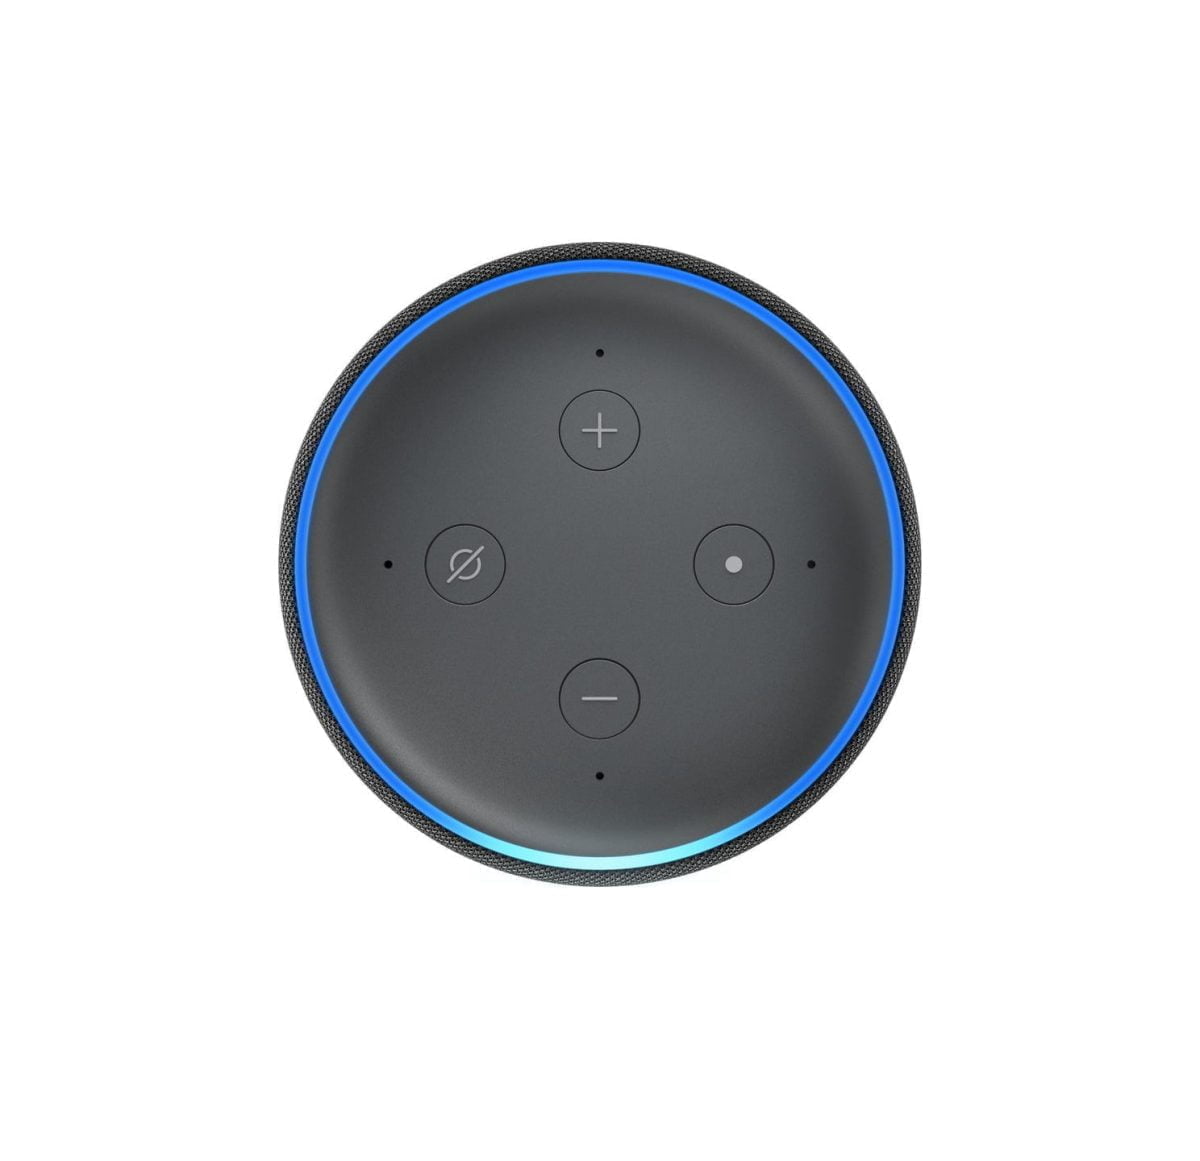 Amazon Https://Youtu.be/Ymewnb3Gjjq &Lt;Ul Class=&Quot;A-Unordered-List A-Vertical A-Spacing-None&Quot;&Gt; &Lt;Li&Gt;&Lt;Span Class=&Quot;A-List-Item&Quot;&Gt;Meet Echo Dot - Our Most Popular Smart Speaker With Fabric Design. It Is Our Most Compact Smart Speaker That Fits Perfectly Into Small Spaces.&Lt;/Span&Gt;&Lt;/Li&Gt; &Lt;Li&Gt;&Lt;Span Class=&Quot;A-List-Item&Quot;&Gt;Improved Speaker Quality - Better Speaker Quality Than Echo Dot Gen 2 For Richer And Louder Sound. Pair With A Second Echo Dot For Stereo Sound.&Lt;/Span&Gt;&Lt;/Li&Gt; &Lt;Li&Gt;&Lt;Span Class=&Quot;A-List-Item&Quot;&Gt;Voice Control Your Music - Stream Songs From Amazon Music, Apple Music, Spotify, Sirius Xm, And Others.&Lt;/Span&Gt;&Lt;/Li&Gt; &Lt;Li&Gt;&Lt;Span Class=&Quot;A-List-Item&Quot;&Gt;Ready To Help - Ask Alexa To Play Music, Answer Questions, Read The News, Check The Weather, Set Alarms, Control Compatible Smart Home Devices, And More.&Lt;/Span&Gt;&Lt;/Li&Gt; &Lt;Li&Gt;&Lt;Span Class=&Quot;A-List-Item&Quot;&Gt;Voice Control Your Smart Home - Turn On Lights, Adjust Thermostats, Lock Doors, And More With Compatible Connected Devices.&Lt;/Span&Gt;&Lt;/Li&Gt; &Lt;Li&Gt;&Lt;Span Class=&Quot;A-List-Item&Quot;&Gt;Connect With Others - Call Almost Anyone Hands-Free. Instantly Drop In On Other Rooms In Your Home Or Make An Announcement To Every Room With A Compatible Echo Device.&Lt;/Span&Gt;&Lt;/Li&Gt; &Lt;Li&Gt;&Lt;Span Class=&Quot;A-List-Item&Quot;&Gt;Alexa Has Skills - With Tens Of Thousands Of Skills And Counting, Alexa Is Always Getting Smarter And Adding New Skills Like Tracking Fitness, Playing Games, And More.&Lt;/Span&Gt;&Lt;/Li&Gt; &Lt;Li&Gt;&Lt;Span Class=&Quot;A-List-Item&Quot;&Gt;Designed To Protect Your Privacy - Built With Multiple Layers Of Privacy Protections And Controls, Including A Microphone Off Button That Electronically Disconnects The Microphones.&Lt;/Span&Gt;&Lt;/Li&Gt; &Lt;/Ul&Gt; Amazon Alexa Amazon Echo Dot 3Rd Generation - Charcoal